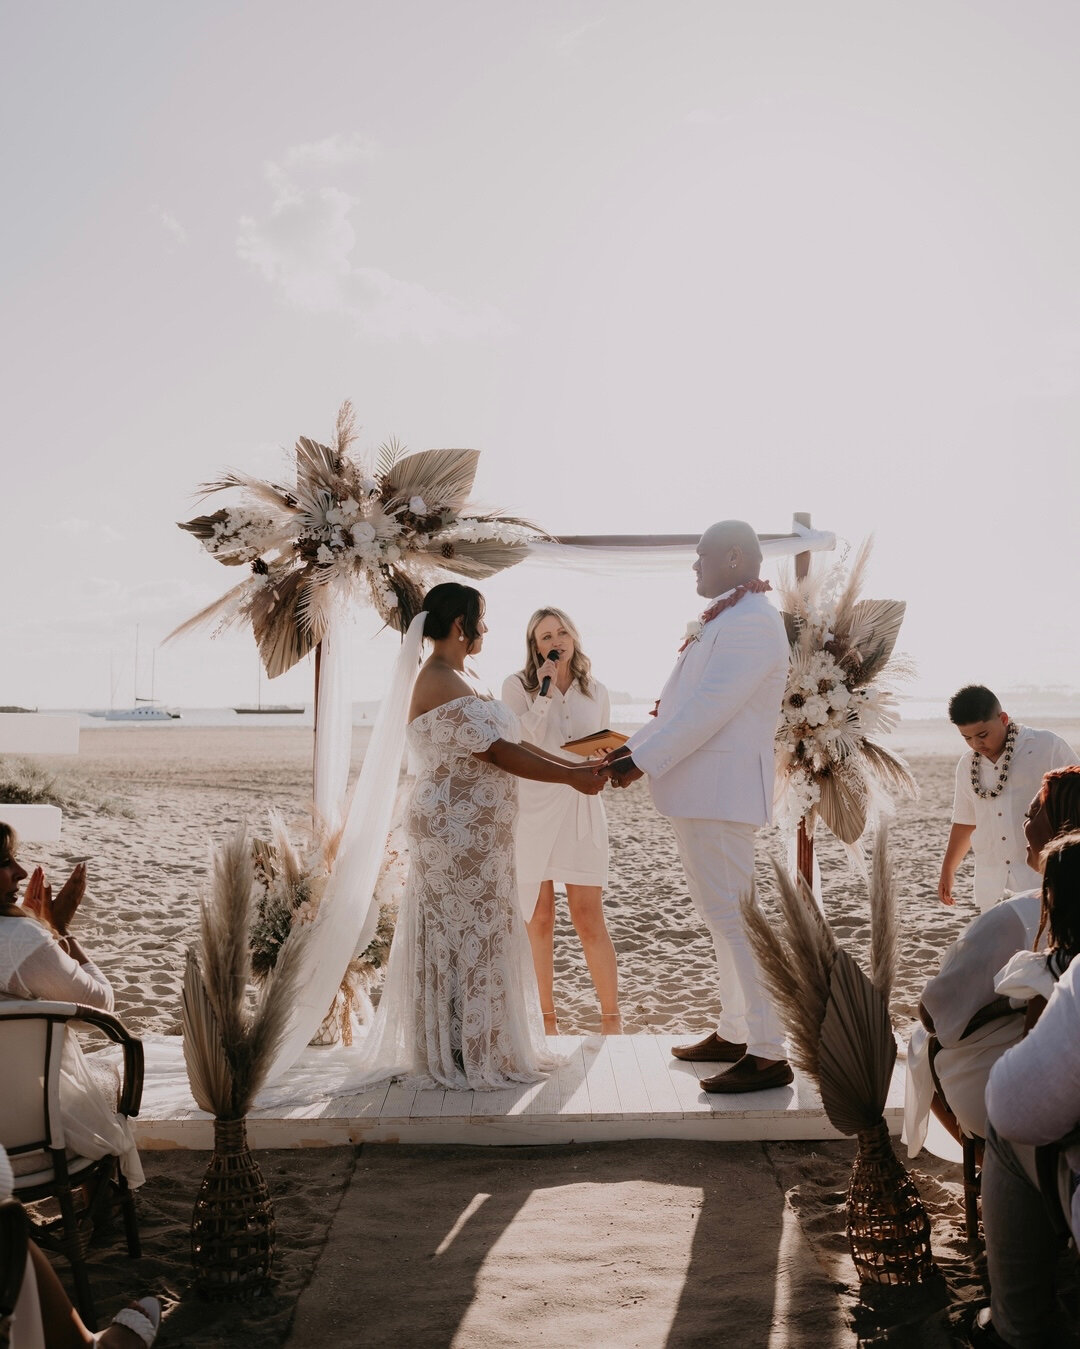 Thursday afternoon weddings on the beach don&rsquo;t get much more epic than this. Throw in their kids as the wedding party, a couple who cried through their vows, everyone wearing white on the sand and well.. you have perfection folks! ​​​​​​​​​.
@l